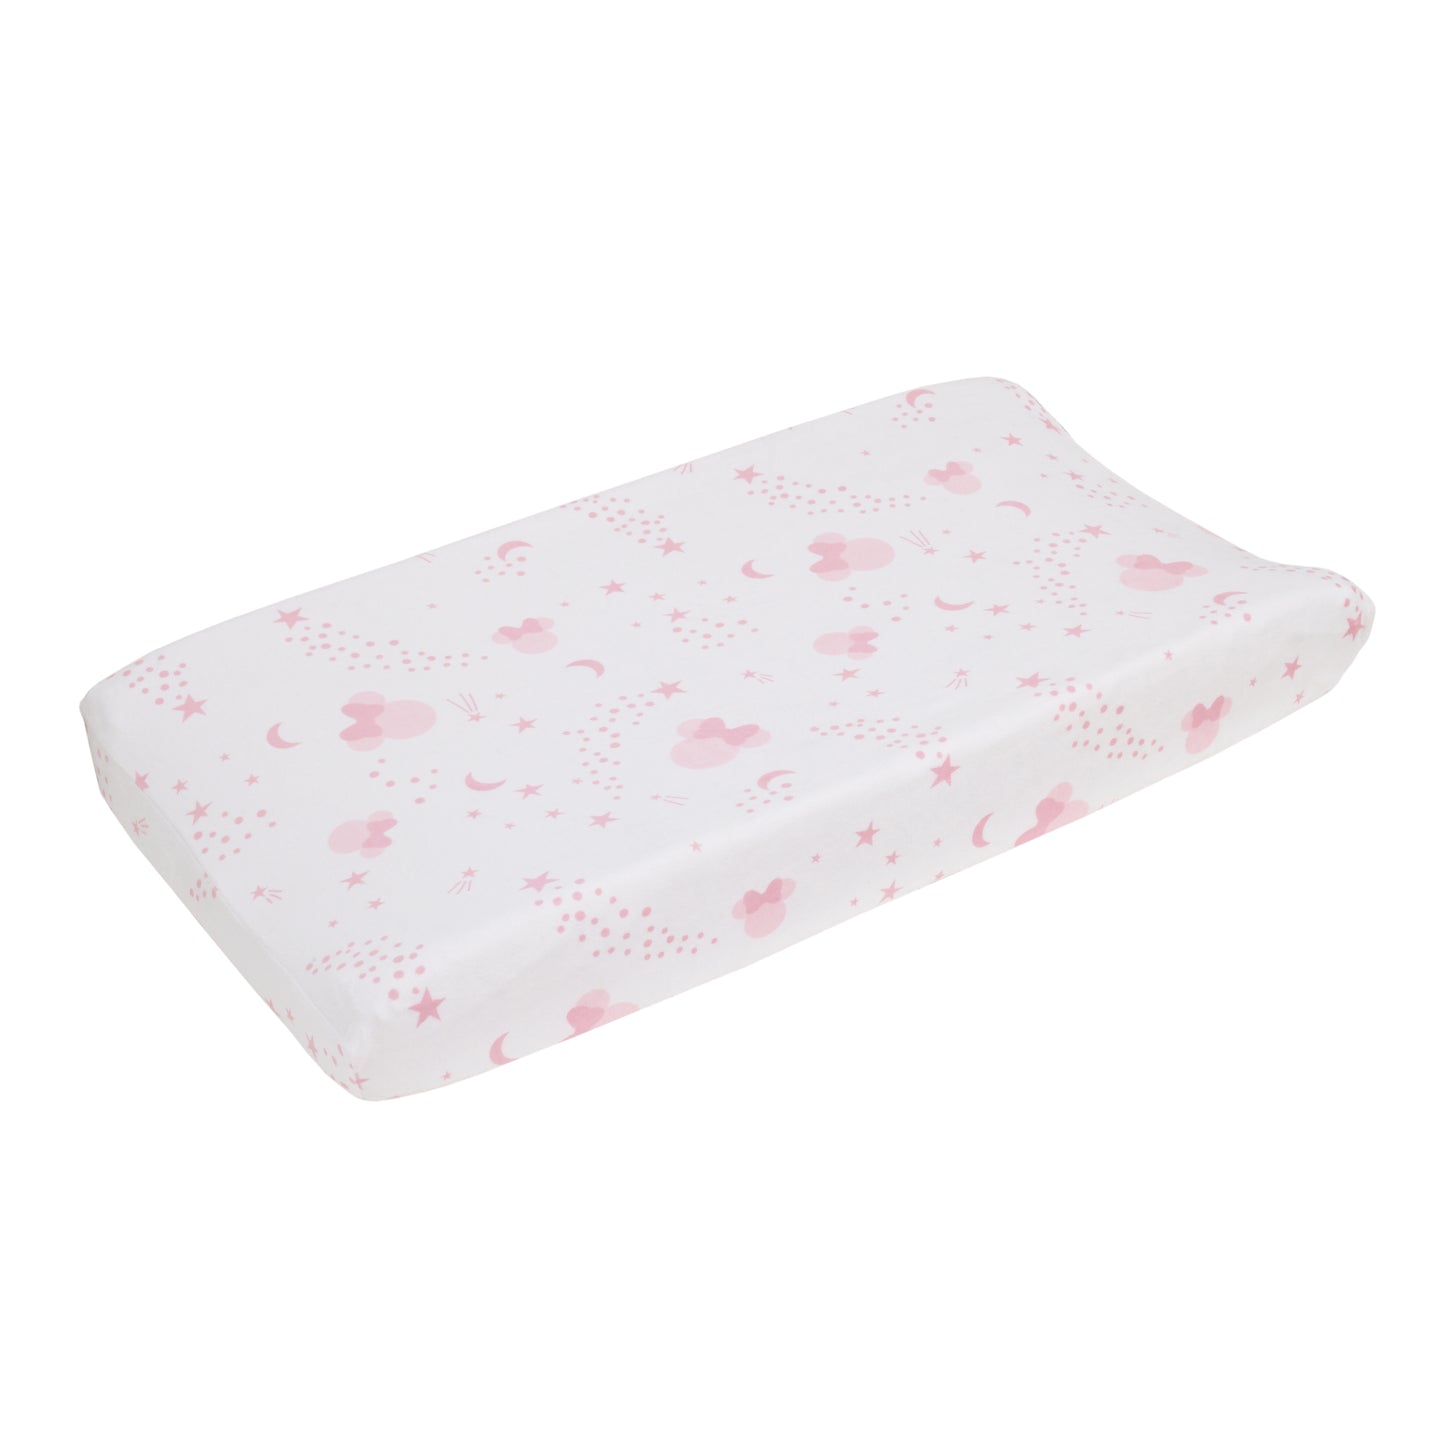 Disney Minnie Mouse Twinkle Twinkle Minnie Pink and White Super Soft Velboa Changing Pad Cover